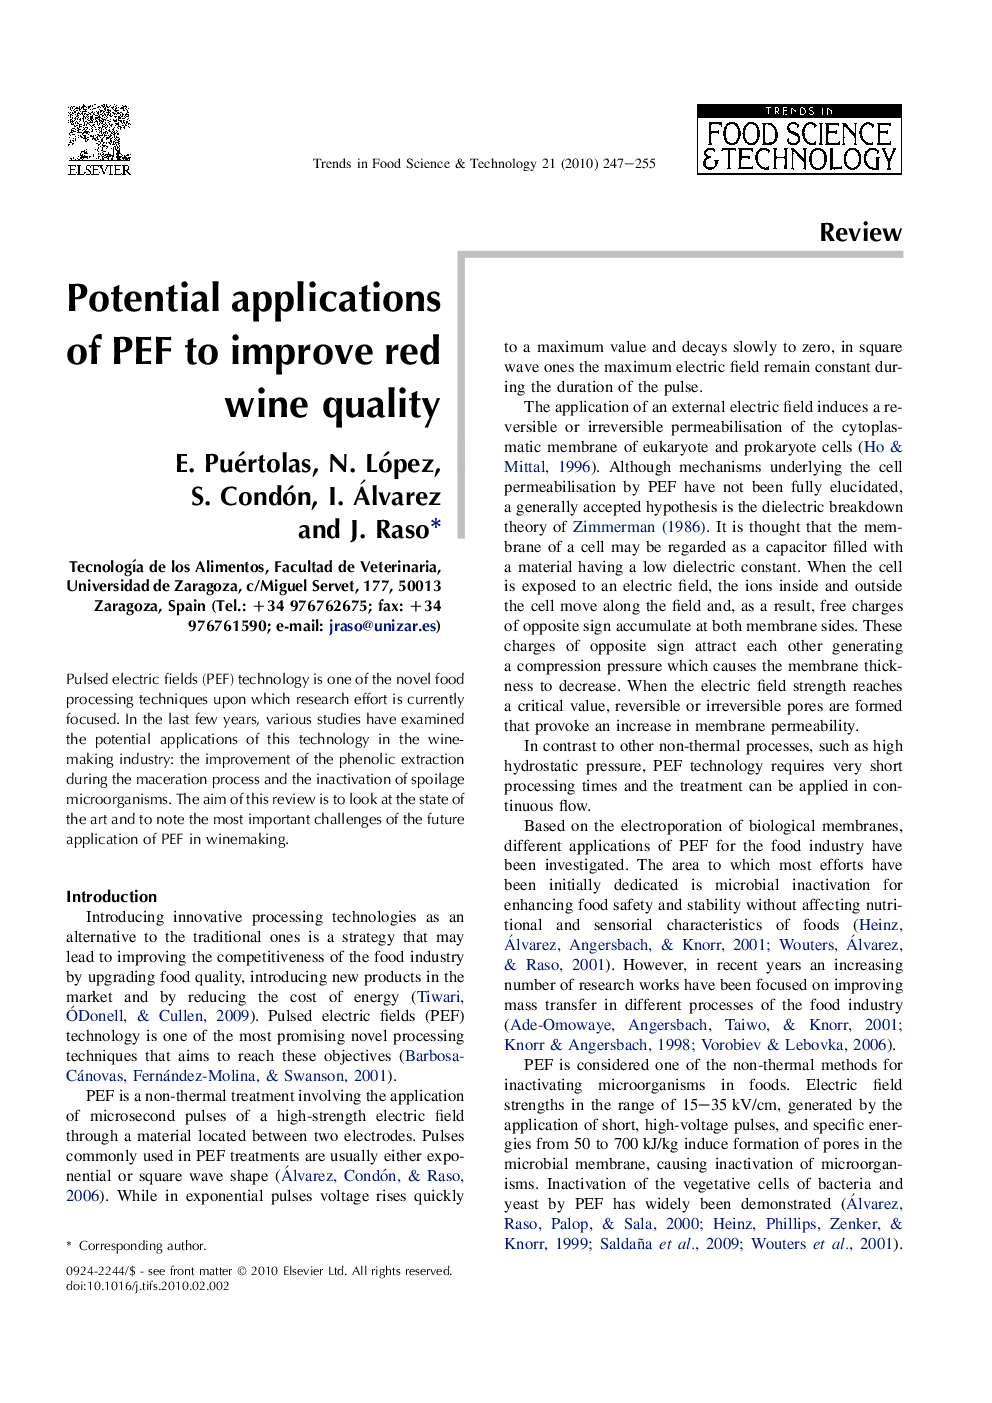 Potential applications of PEF to improve red wine quality